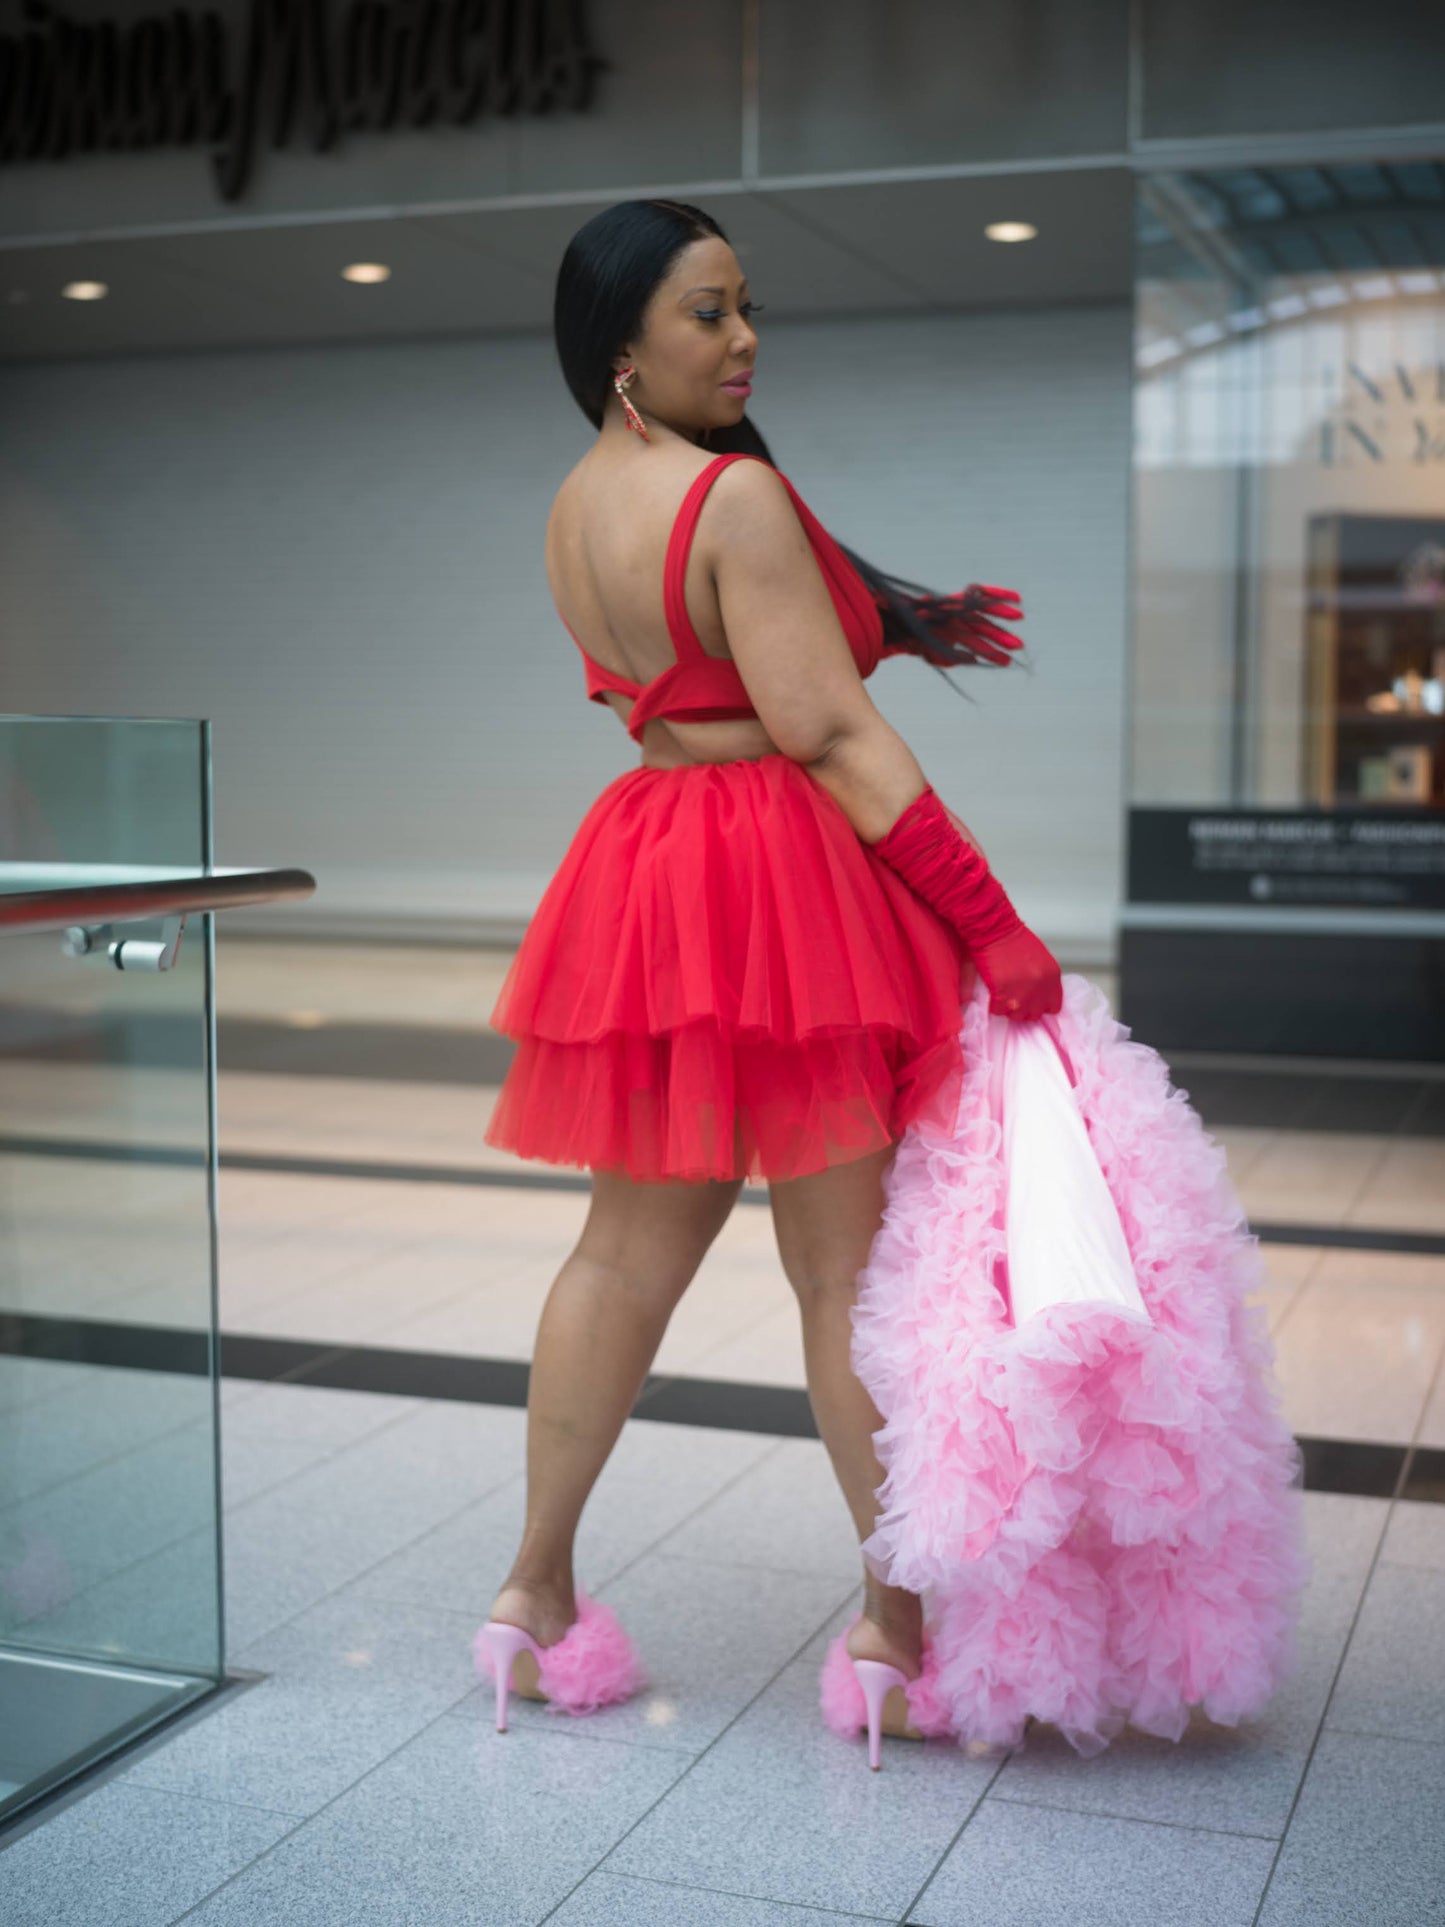 Queen of hearts tulle dress